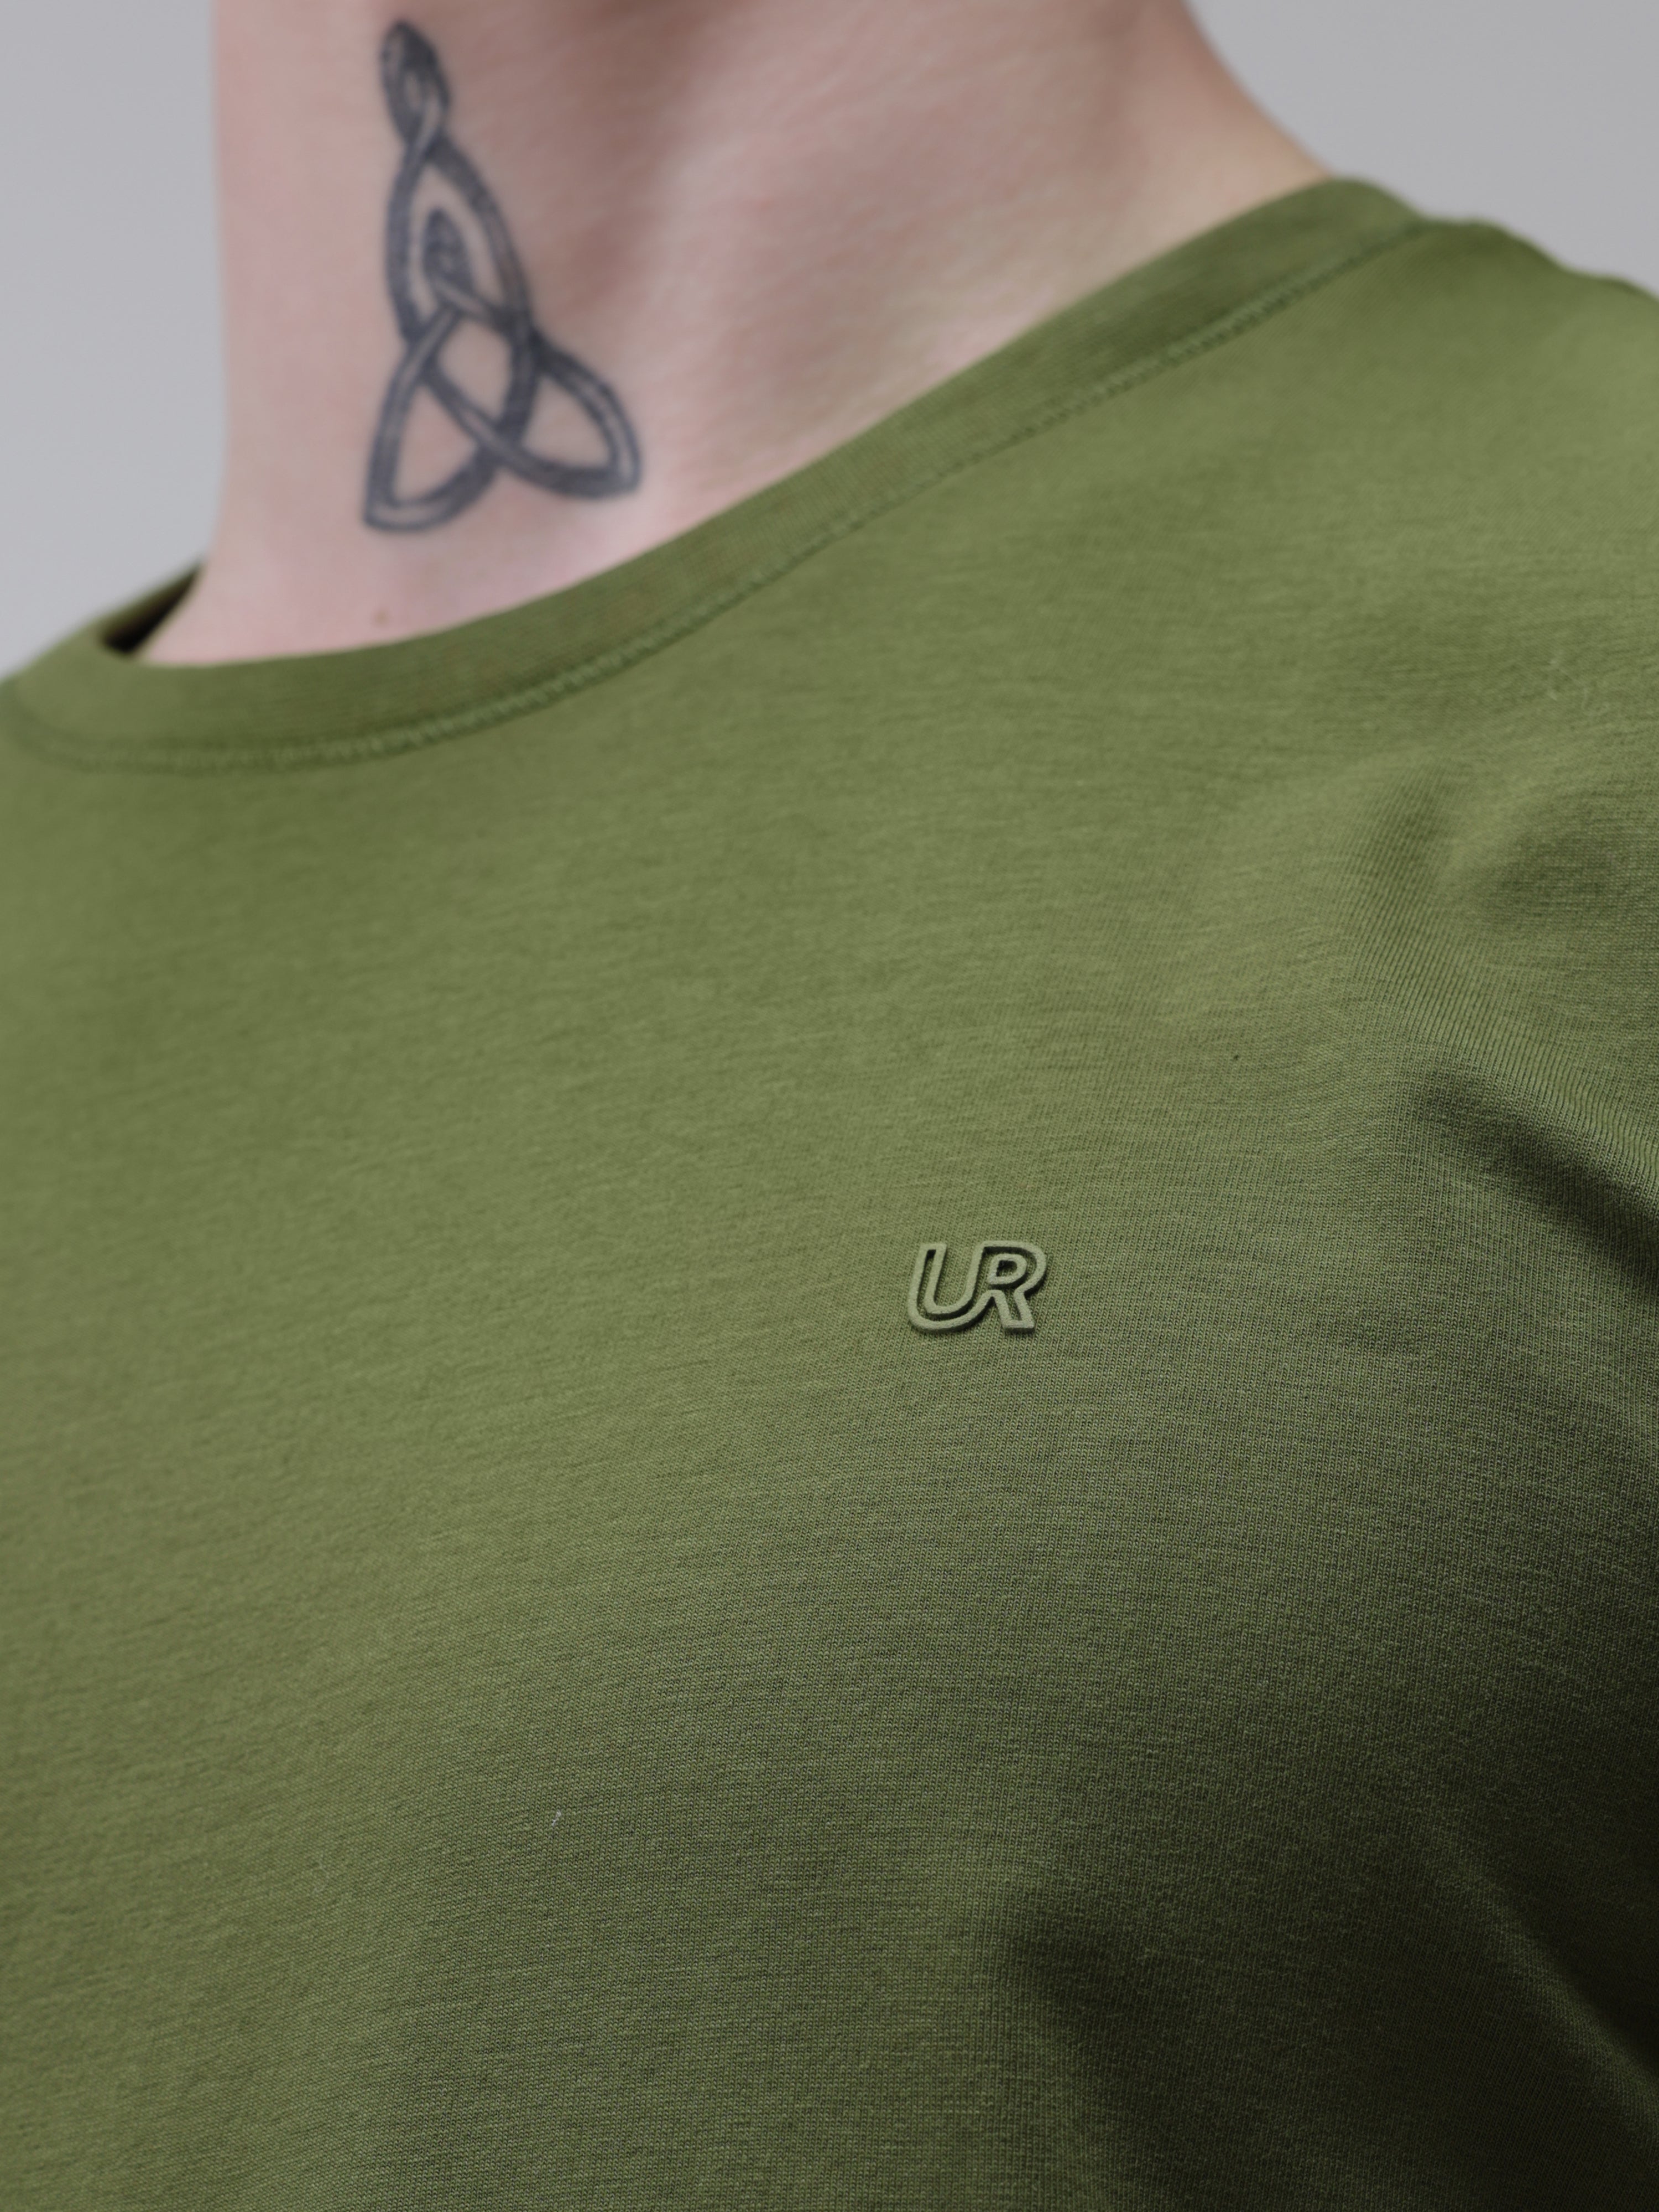 Olive green round-neck Turms T-shirt with logo, premium cotton, tailored fit, water-resistant, anti-stain, men's wear.